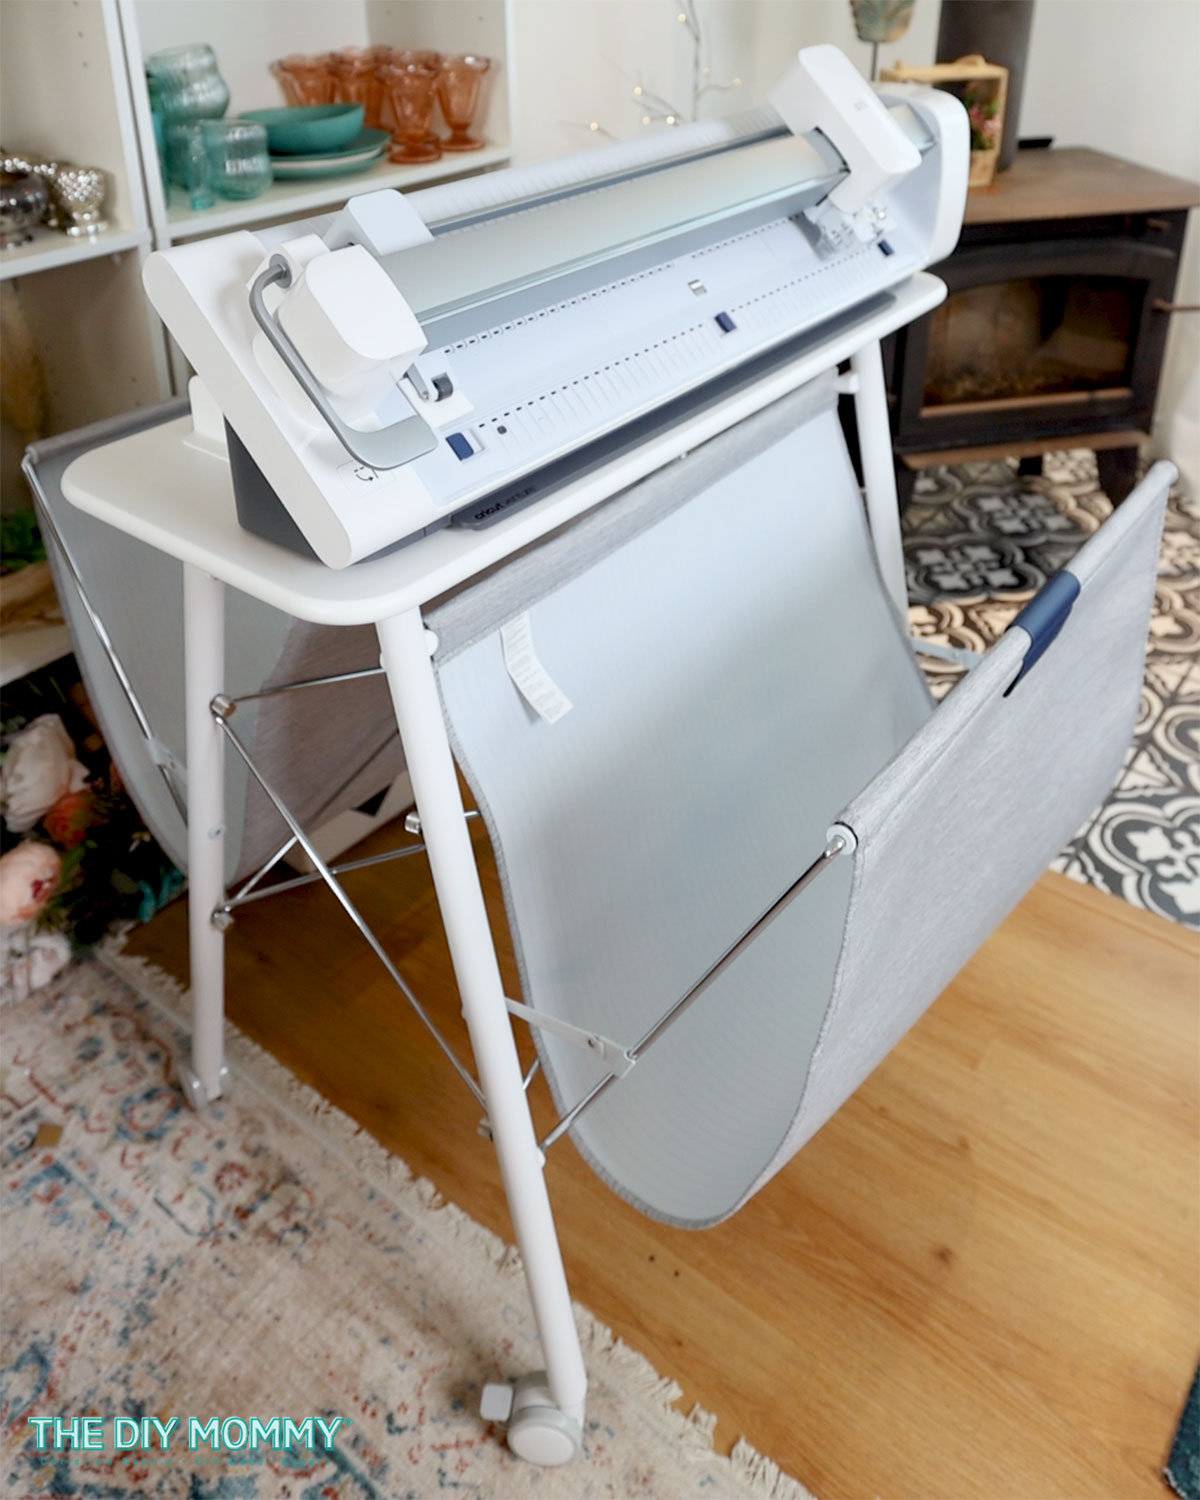 What is a Cricut machine and what does it do?